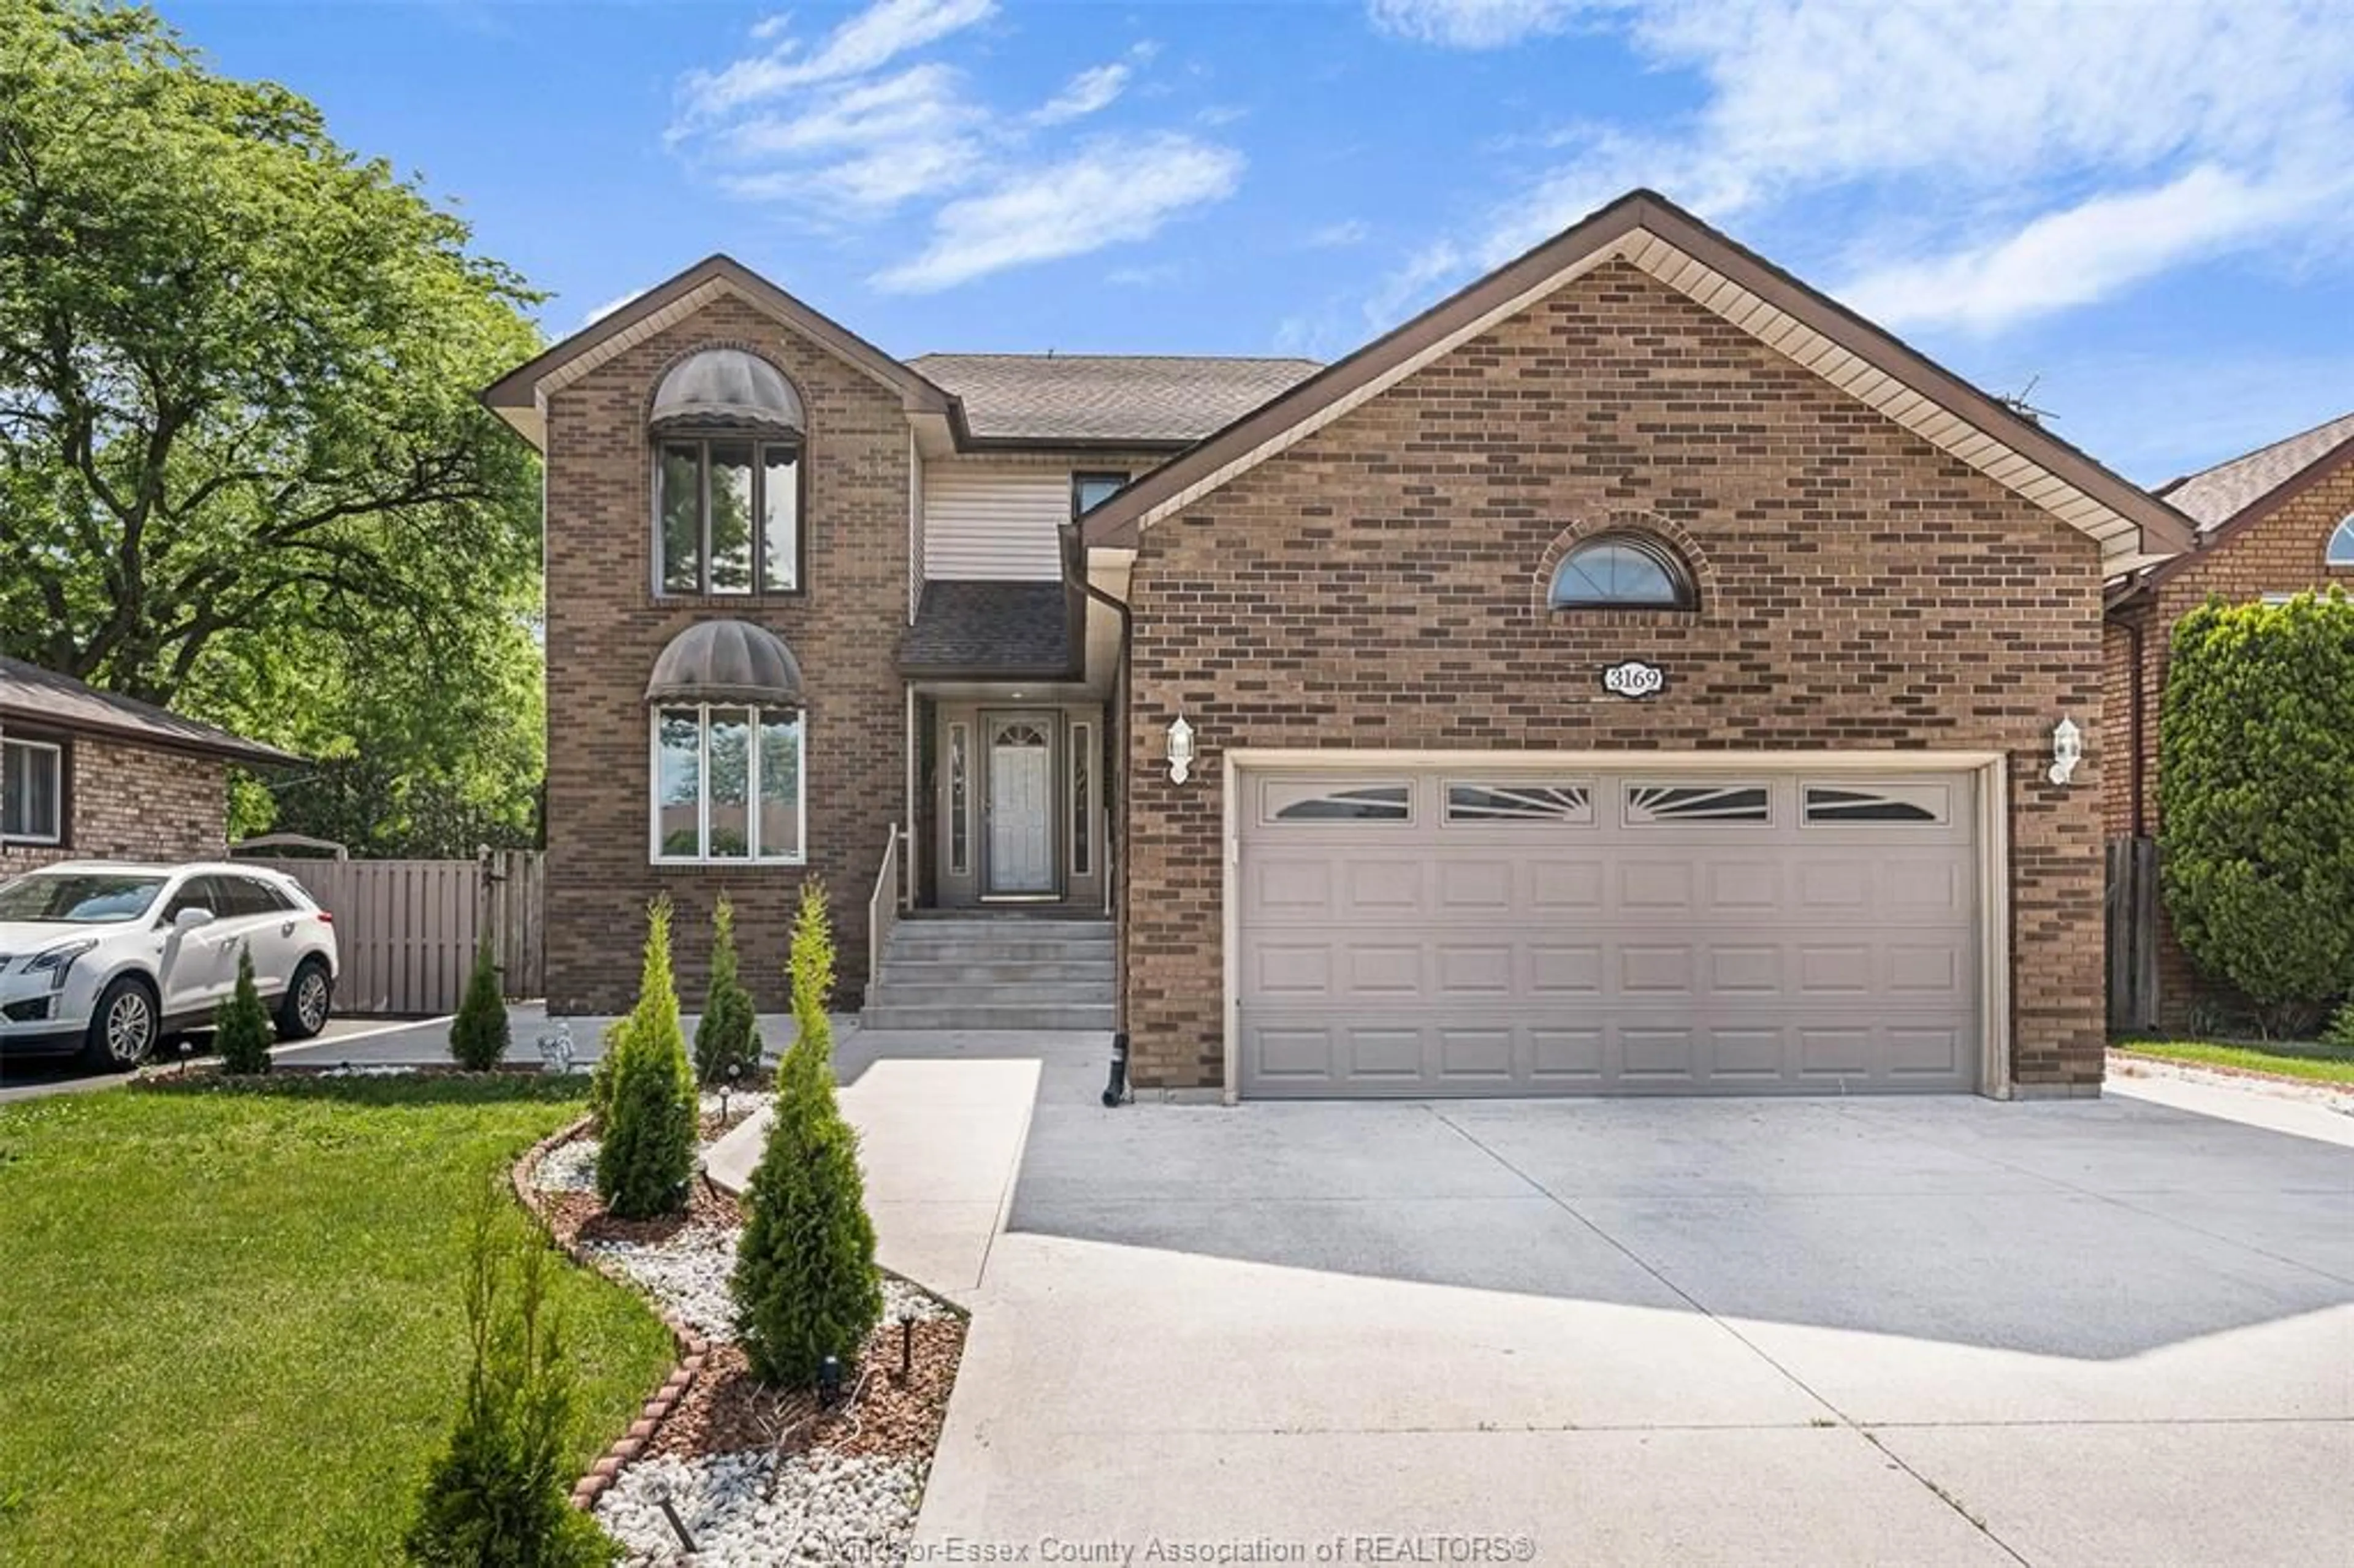 Home with brick exterior material for 3169 CLEMENCEAU Blvd, Windsor Ontario N8T 2R6